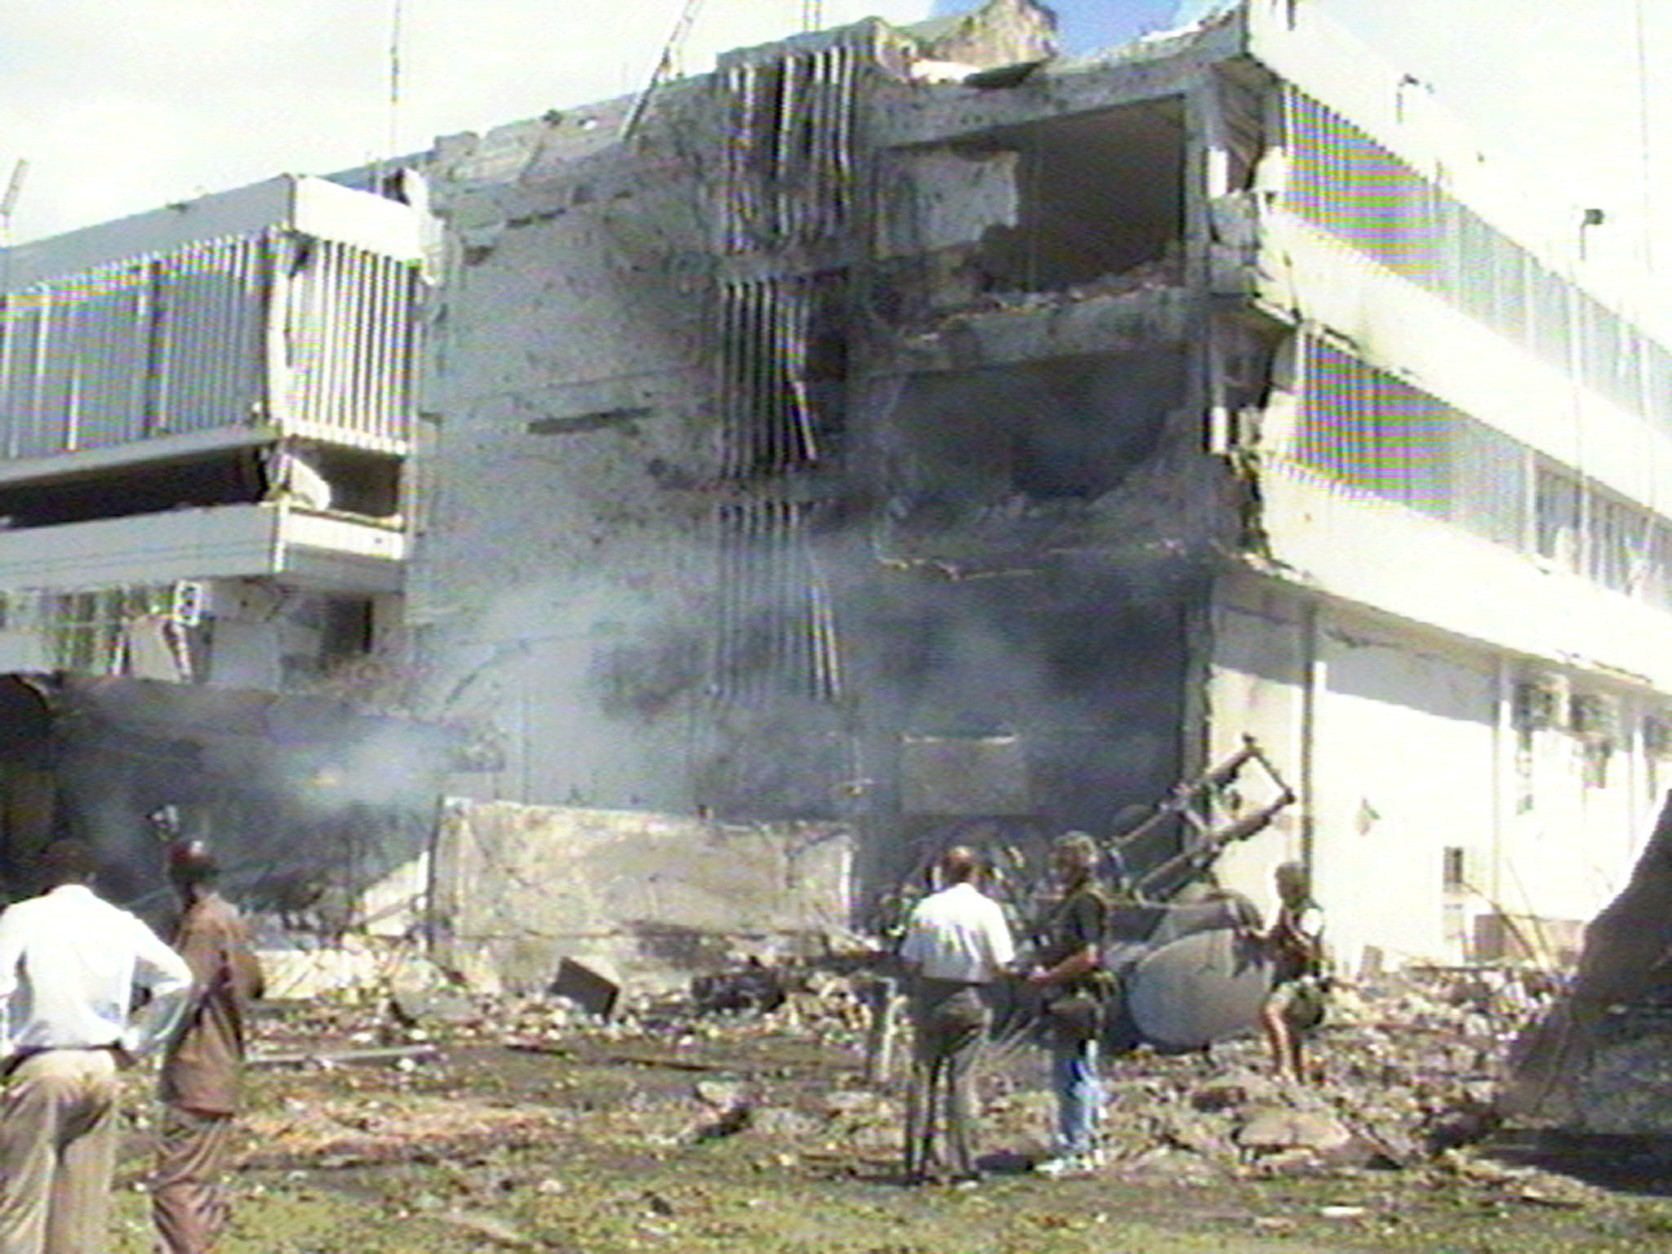 Smoke rises from the U.S. Embassy in Dar es Salaam, Tanzania, in this frame grabe from television, after a suspected car bomb exploded outside it Friday Aug. 7 1998.  Reports said that at least nine people were killed and 16 were injured in the blast. There was also an explosion outside the U.S. Embassy in Nairobi, Kenya, at the same time, causing extensive damage and killing more than people. (AP Photo / APTV)  TANZANIA OUT - TV OUT